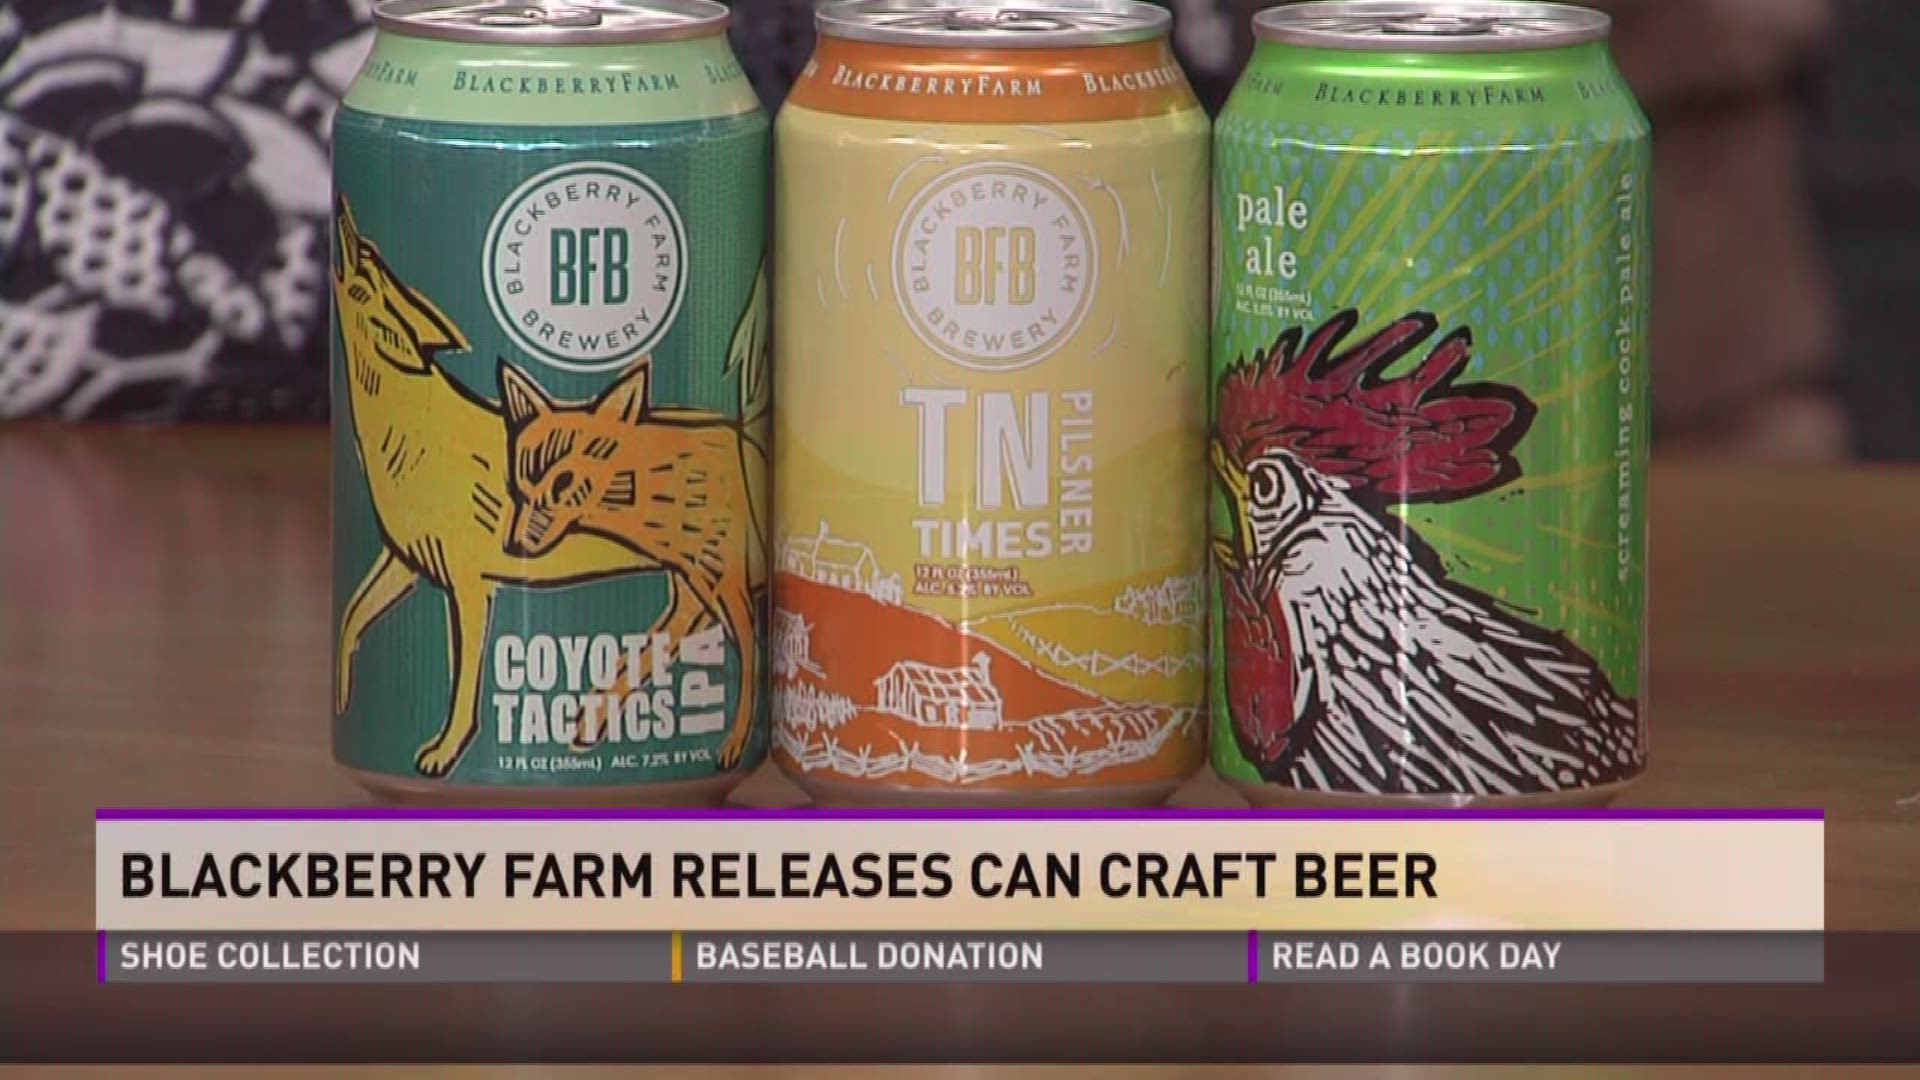 Blackberry Farm Releases Can Craft Beer